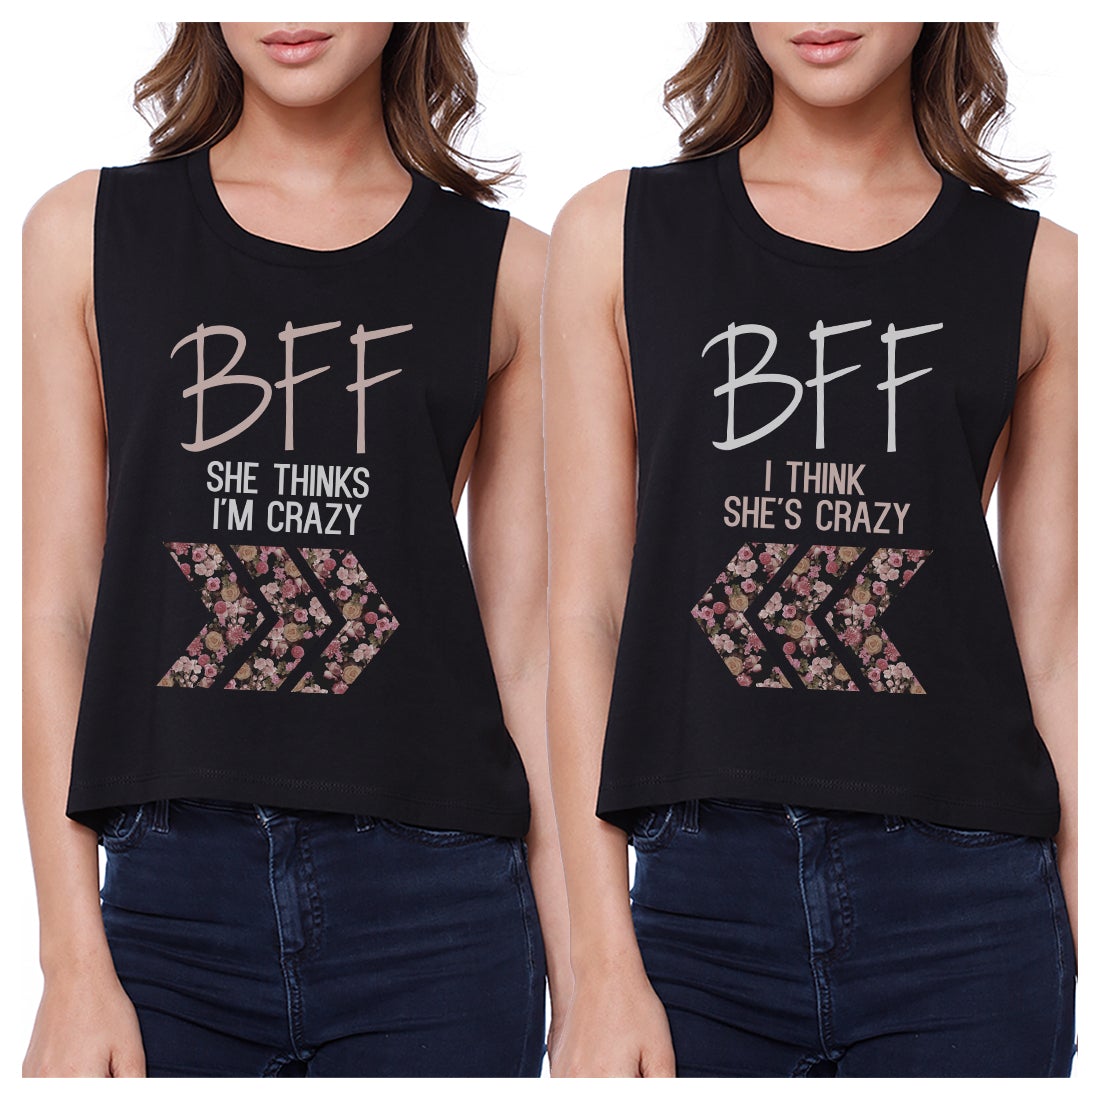 BFF Floral Crazy BFF Matching Crop Top Womens Graphic Cropped Tanks Black